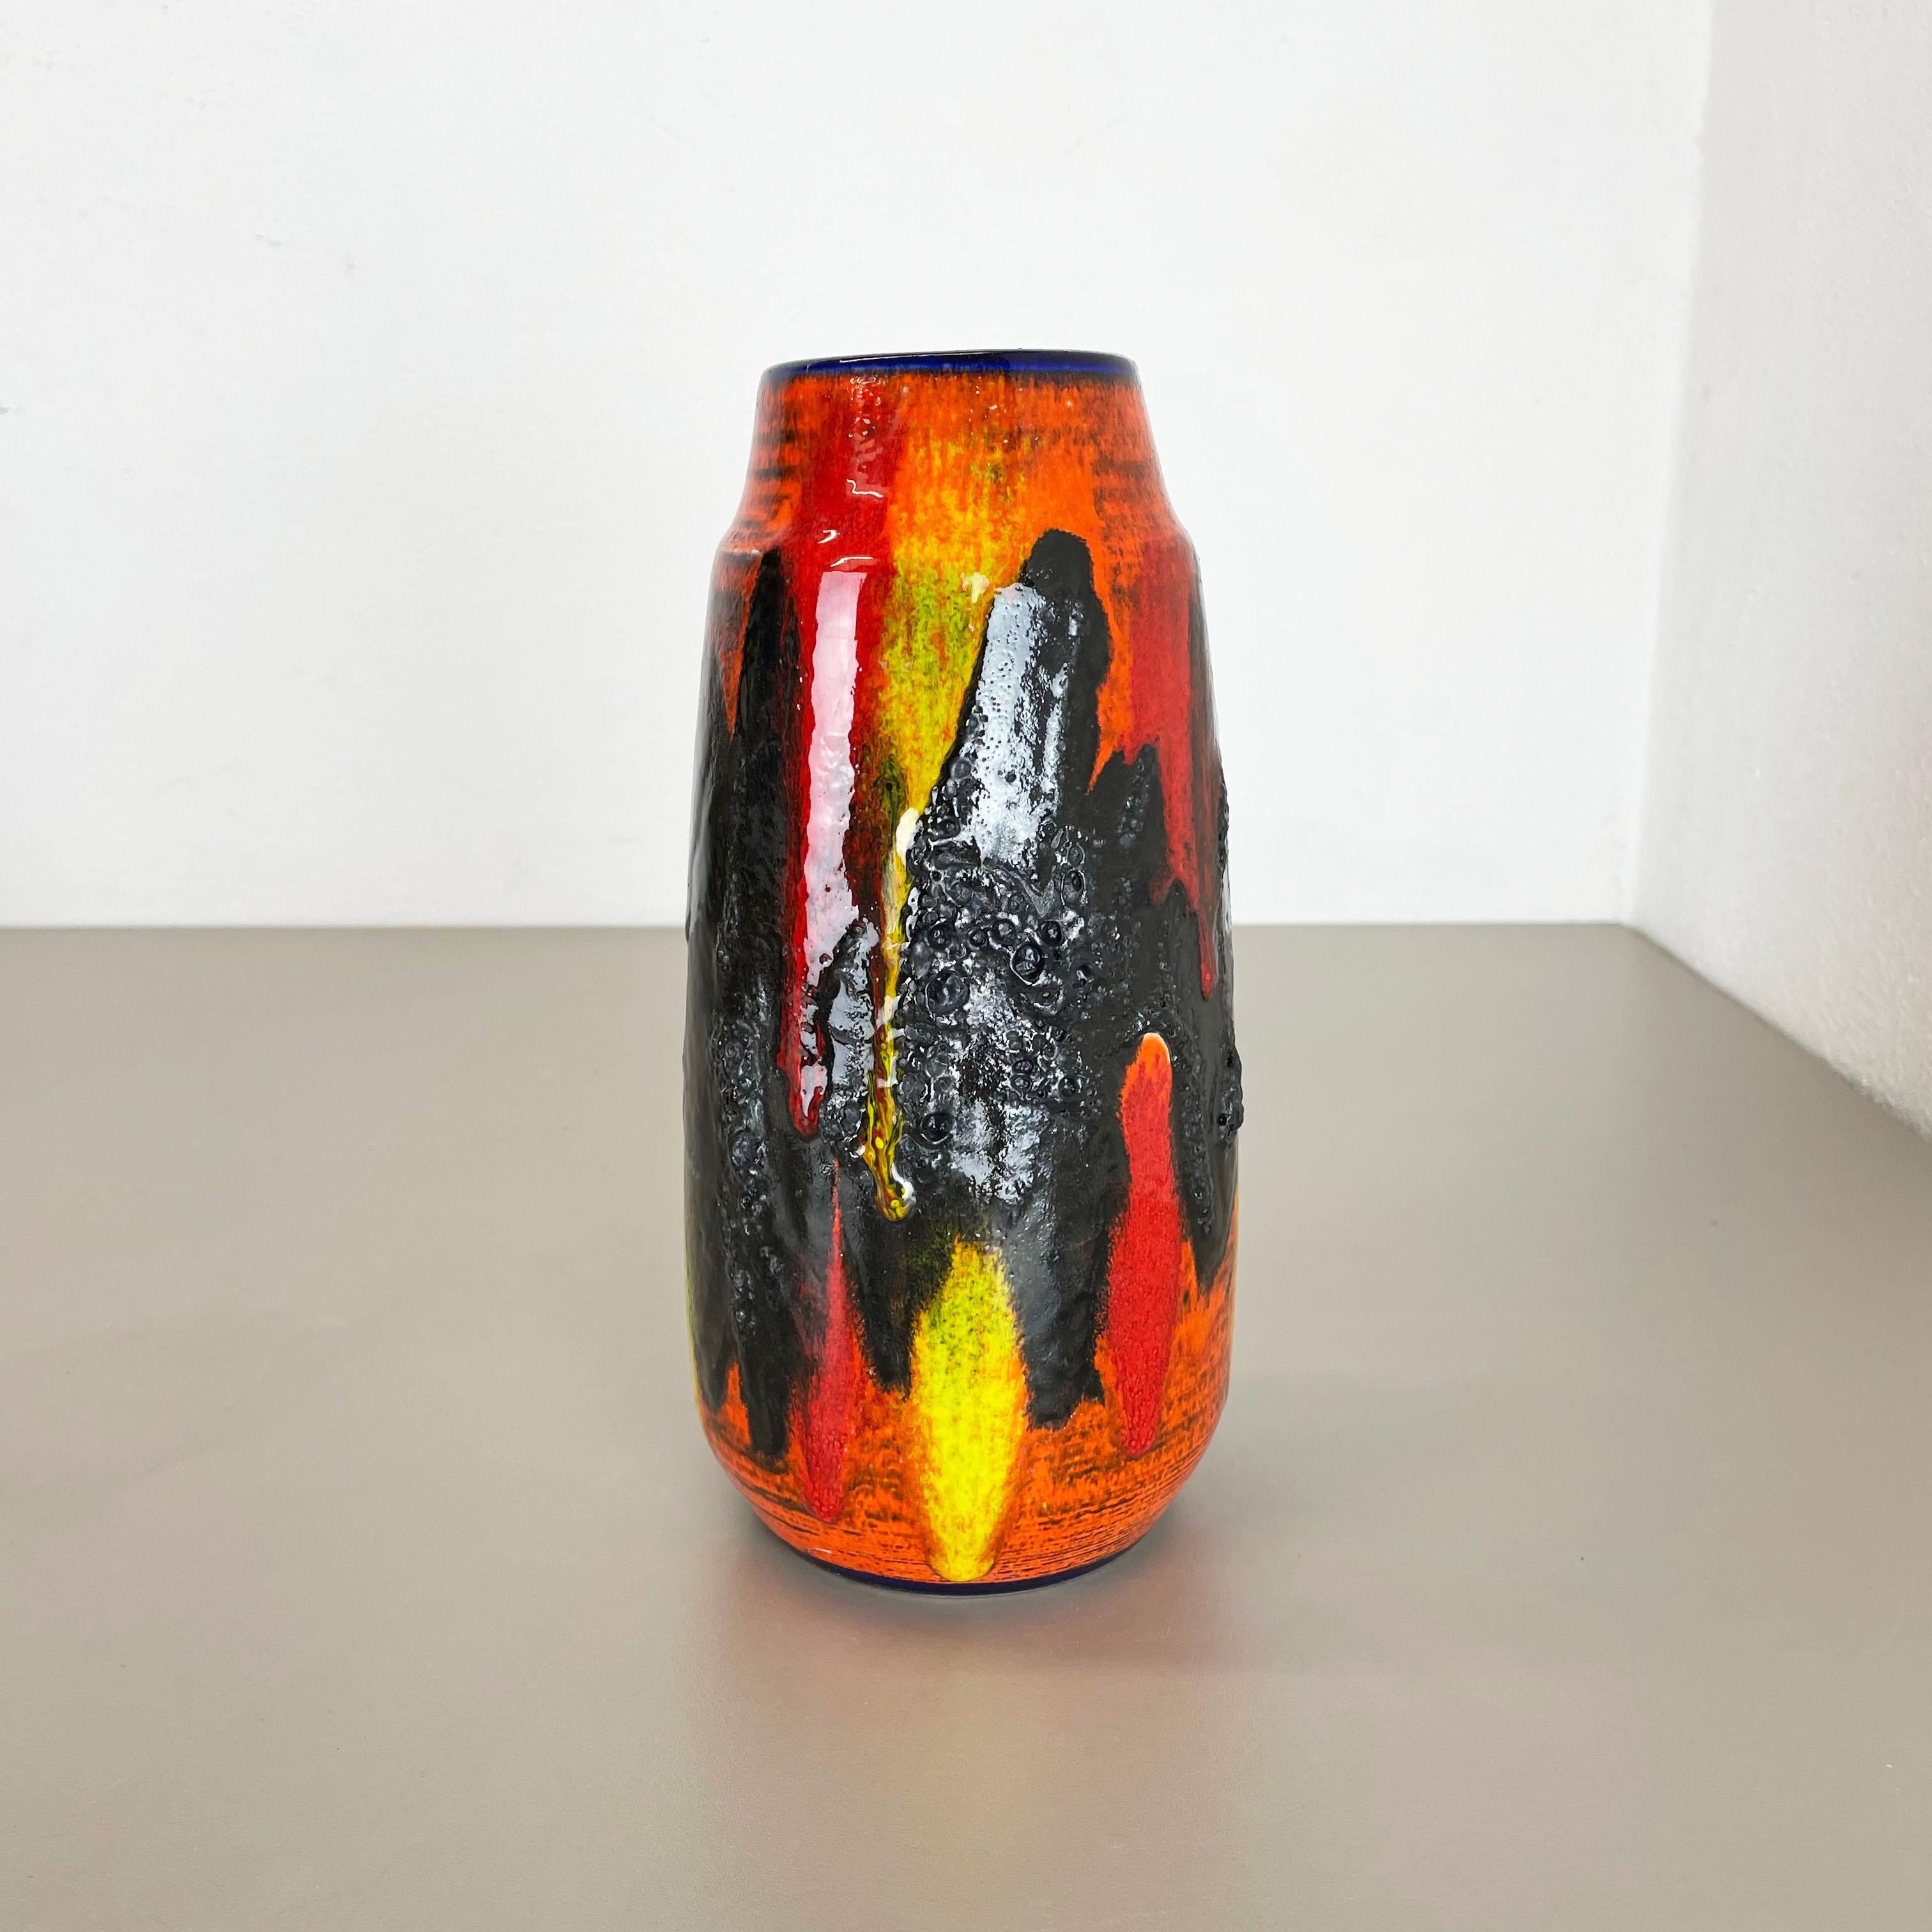 Article:

Fat lava art vase, heavy Brutalist glaze


Producer:

Scheurich, Germany



Decade:

1970s




This original vintage vase was produced in the 1970s in Germany. It is made of ceramic pottery in fat lava optic with abstract